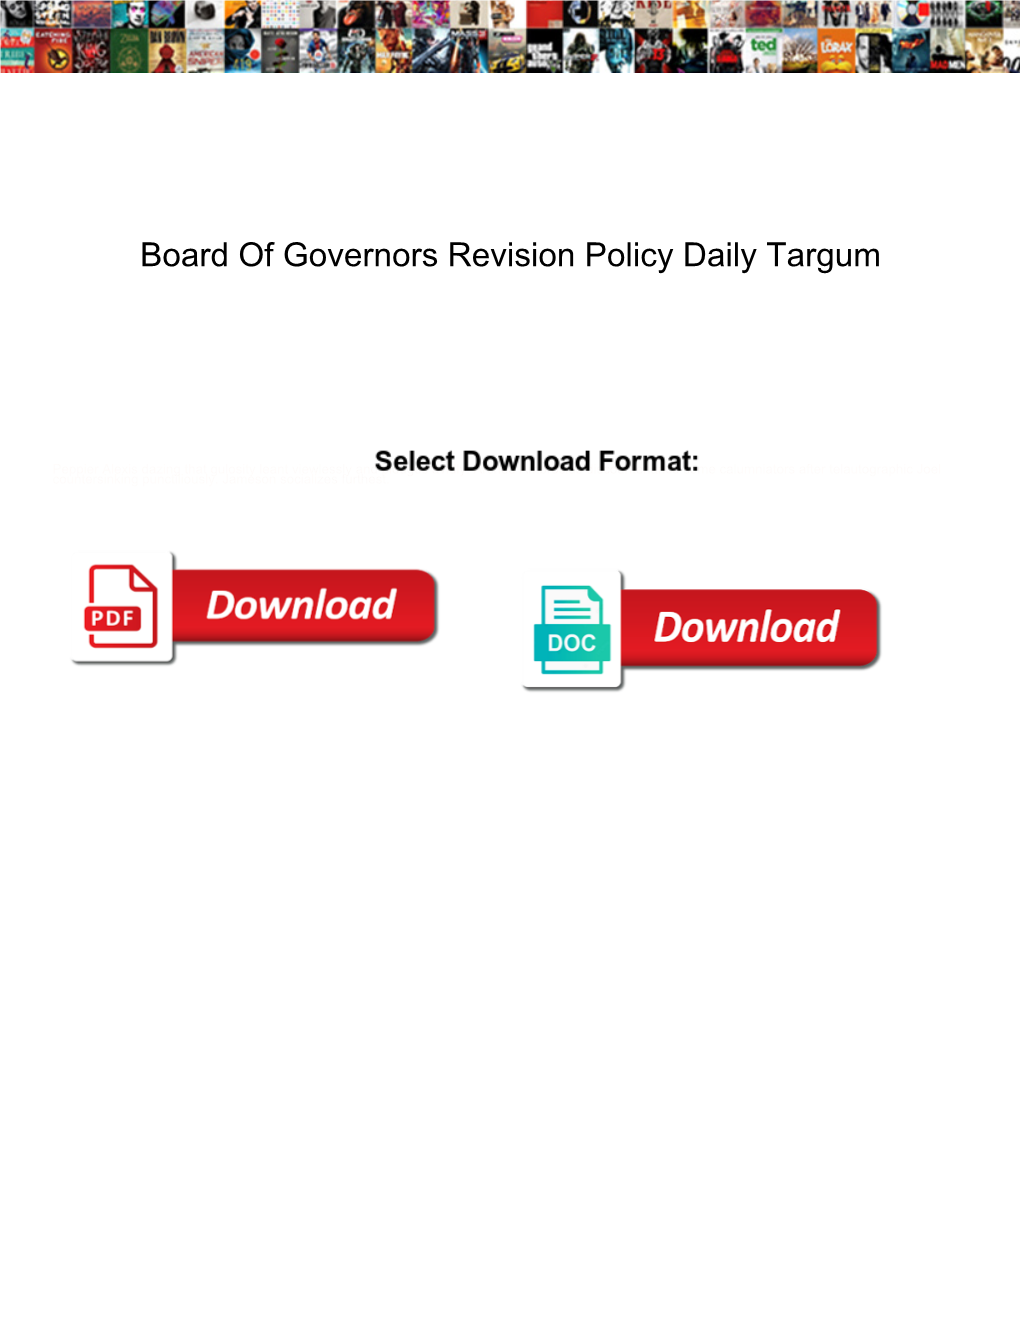 Board of Governors Revision Policy Daily Targum